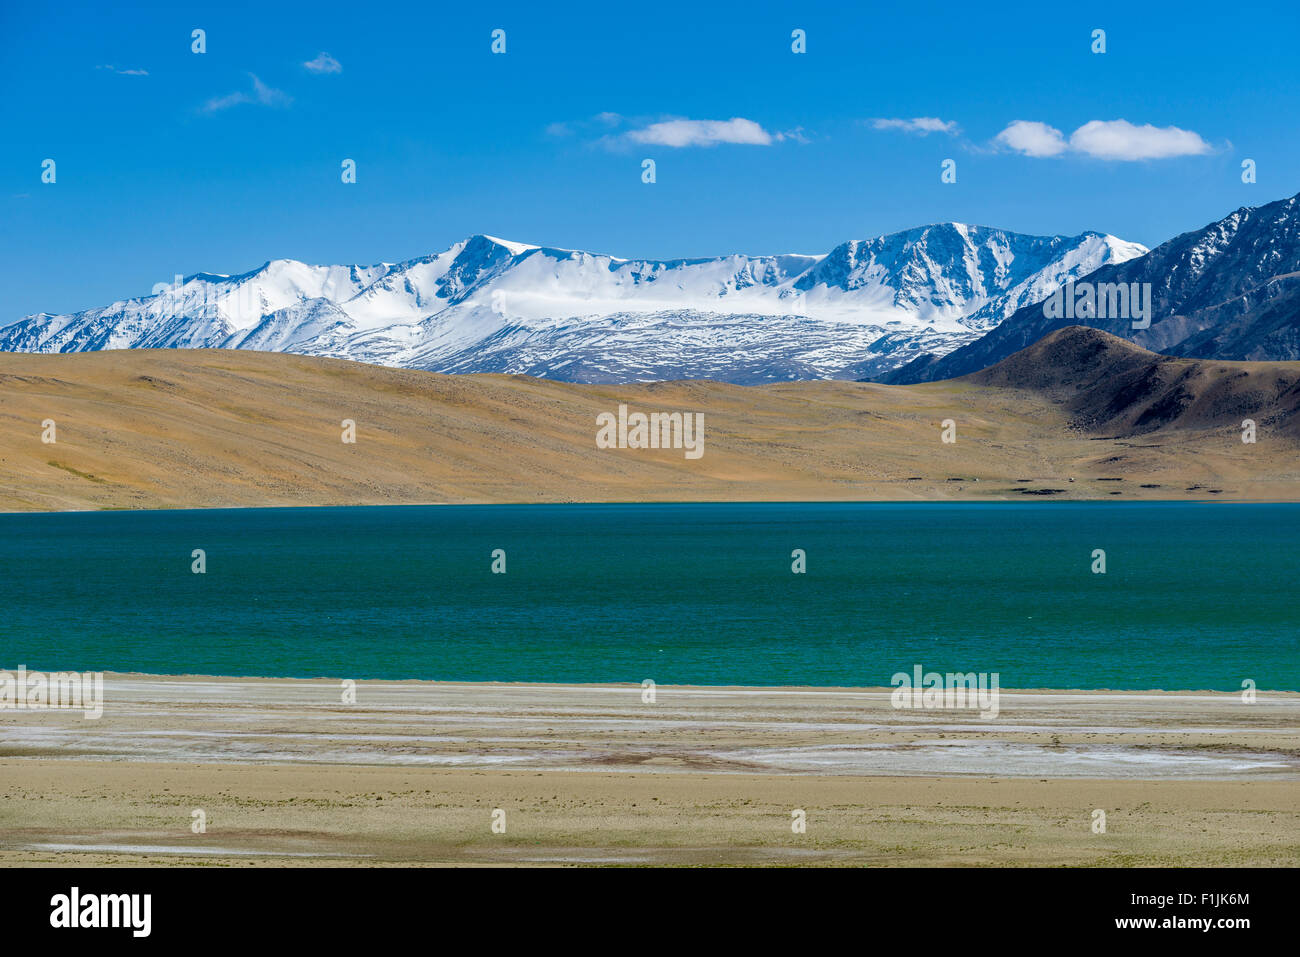 Barren landscape with a blue lake and snow capped mountains, Changtang area, Korzok, Jammu and Kashmir, India Stock Photo